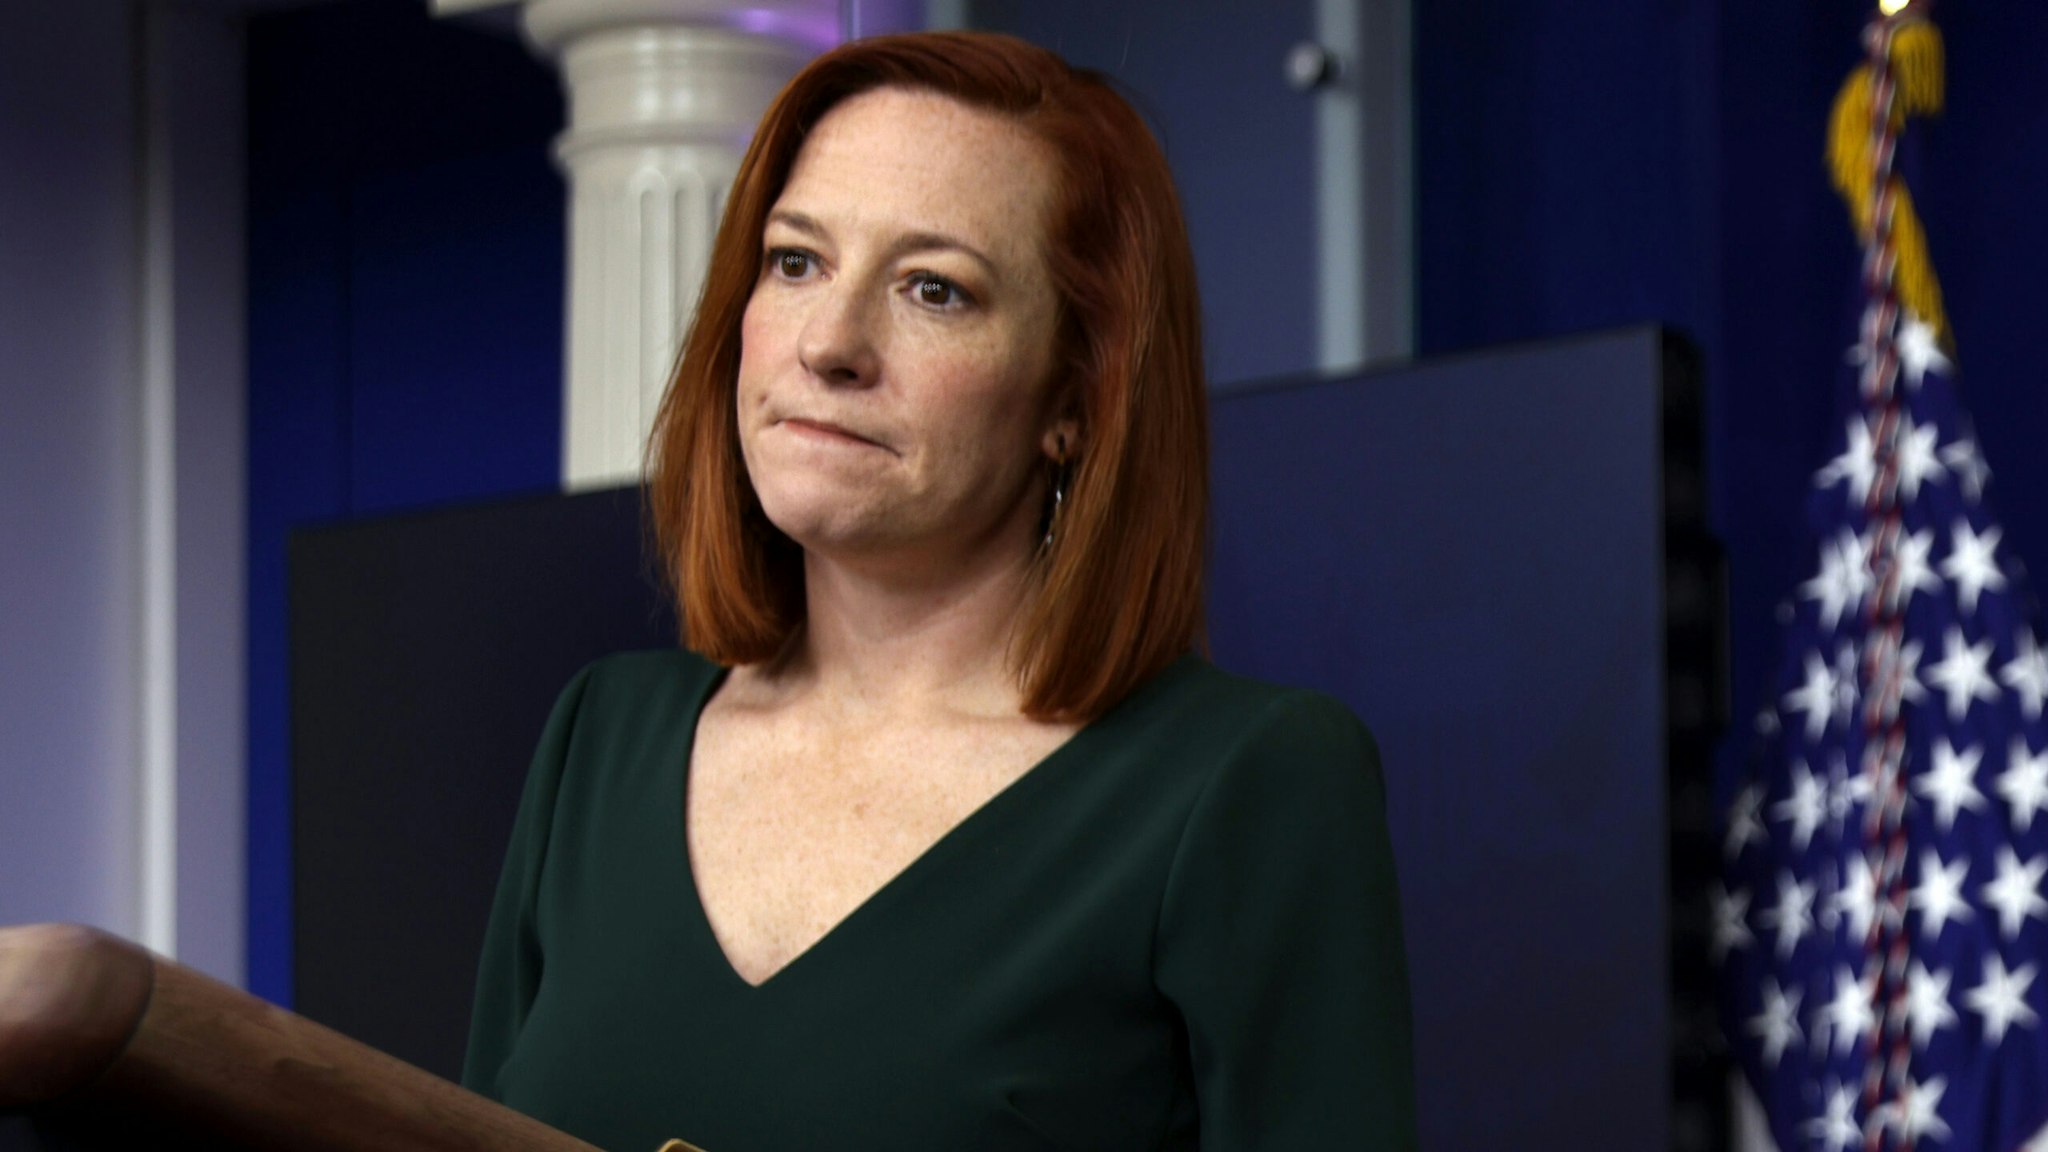 WASHINGTON, DC - FEBRUARY 25: White House Press Secretary Jen Psaki listens during a news briefing at the James Brady Press Briefing Room of the White House February 25, 2021 in Washington, DC. Psaki held a news briefing to answer questions from the members of the press.